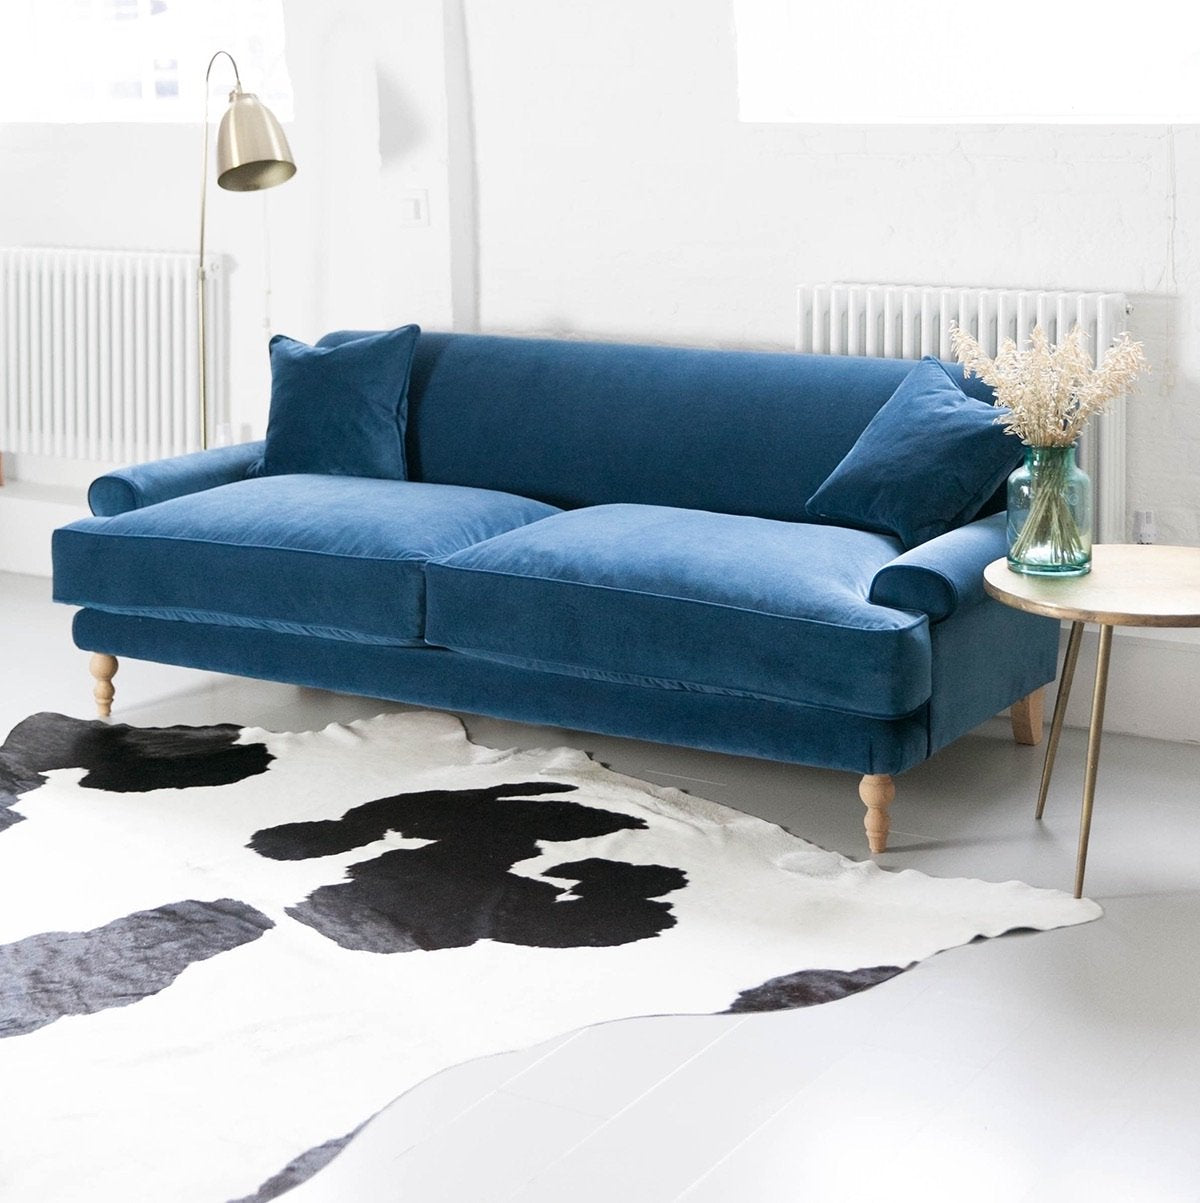 How to decorate your home with Cow Hide rugs